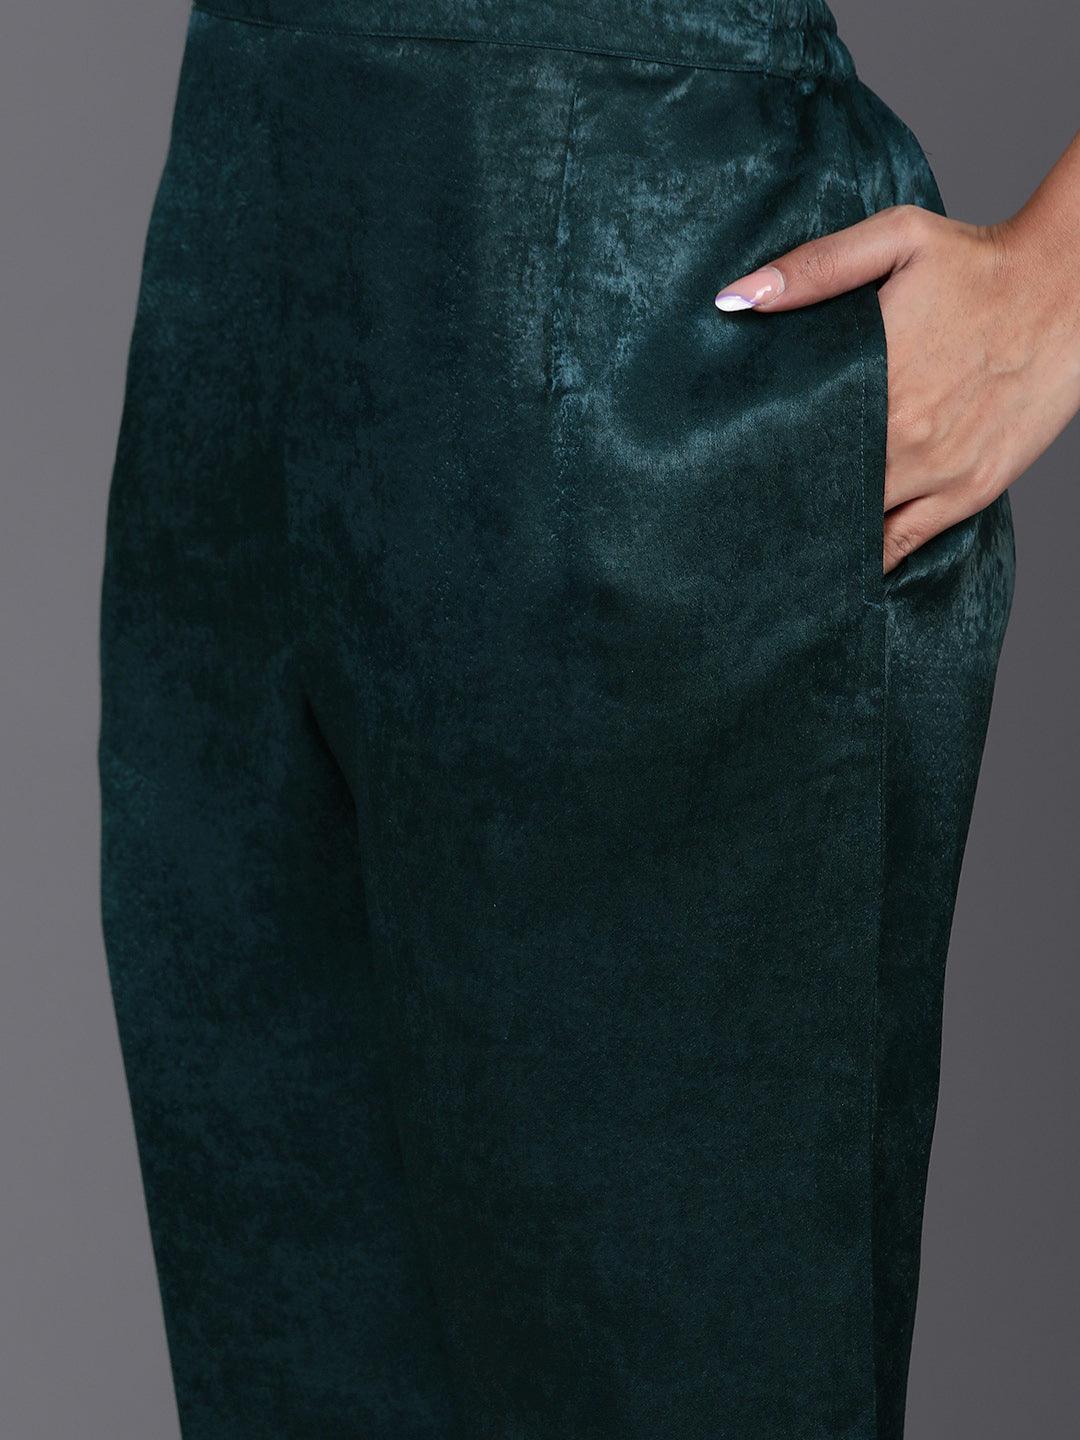 Teal Embroidered Polyester Straight Kurta With Trousers - Libas